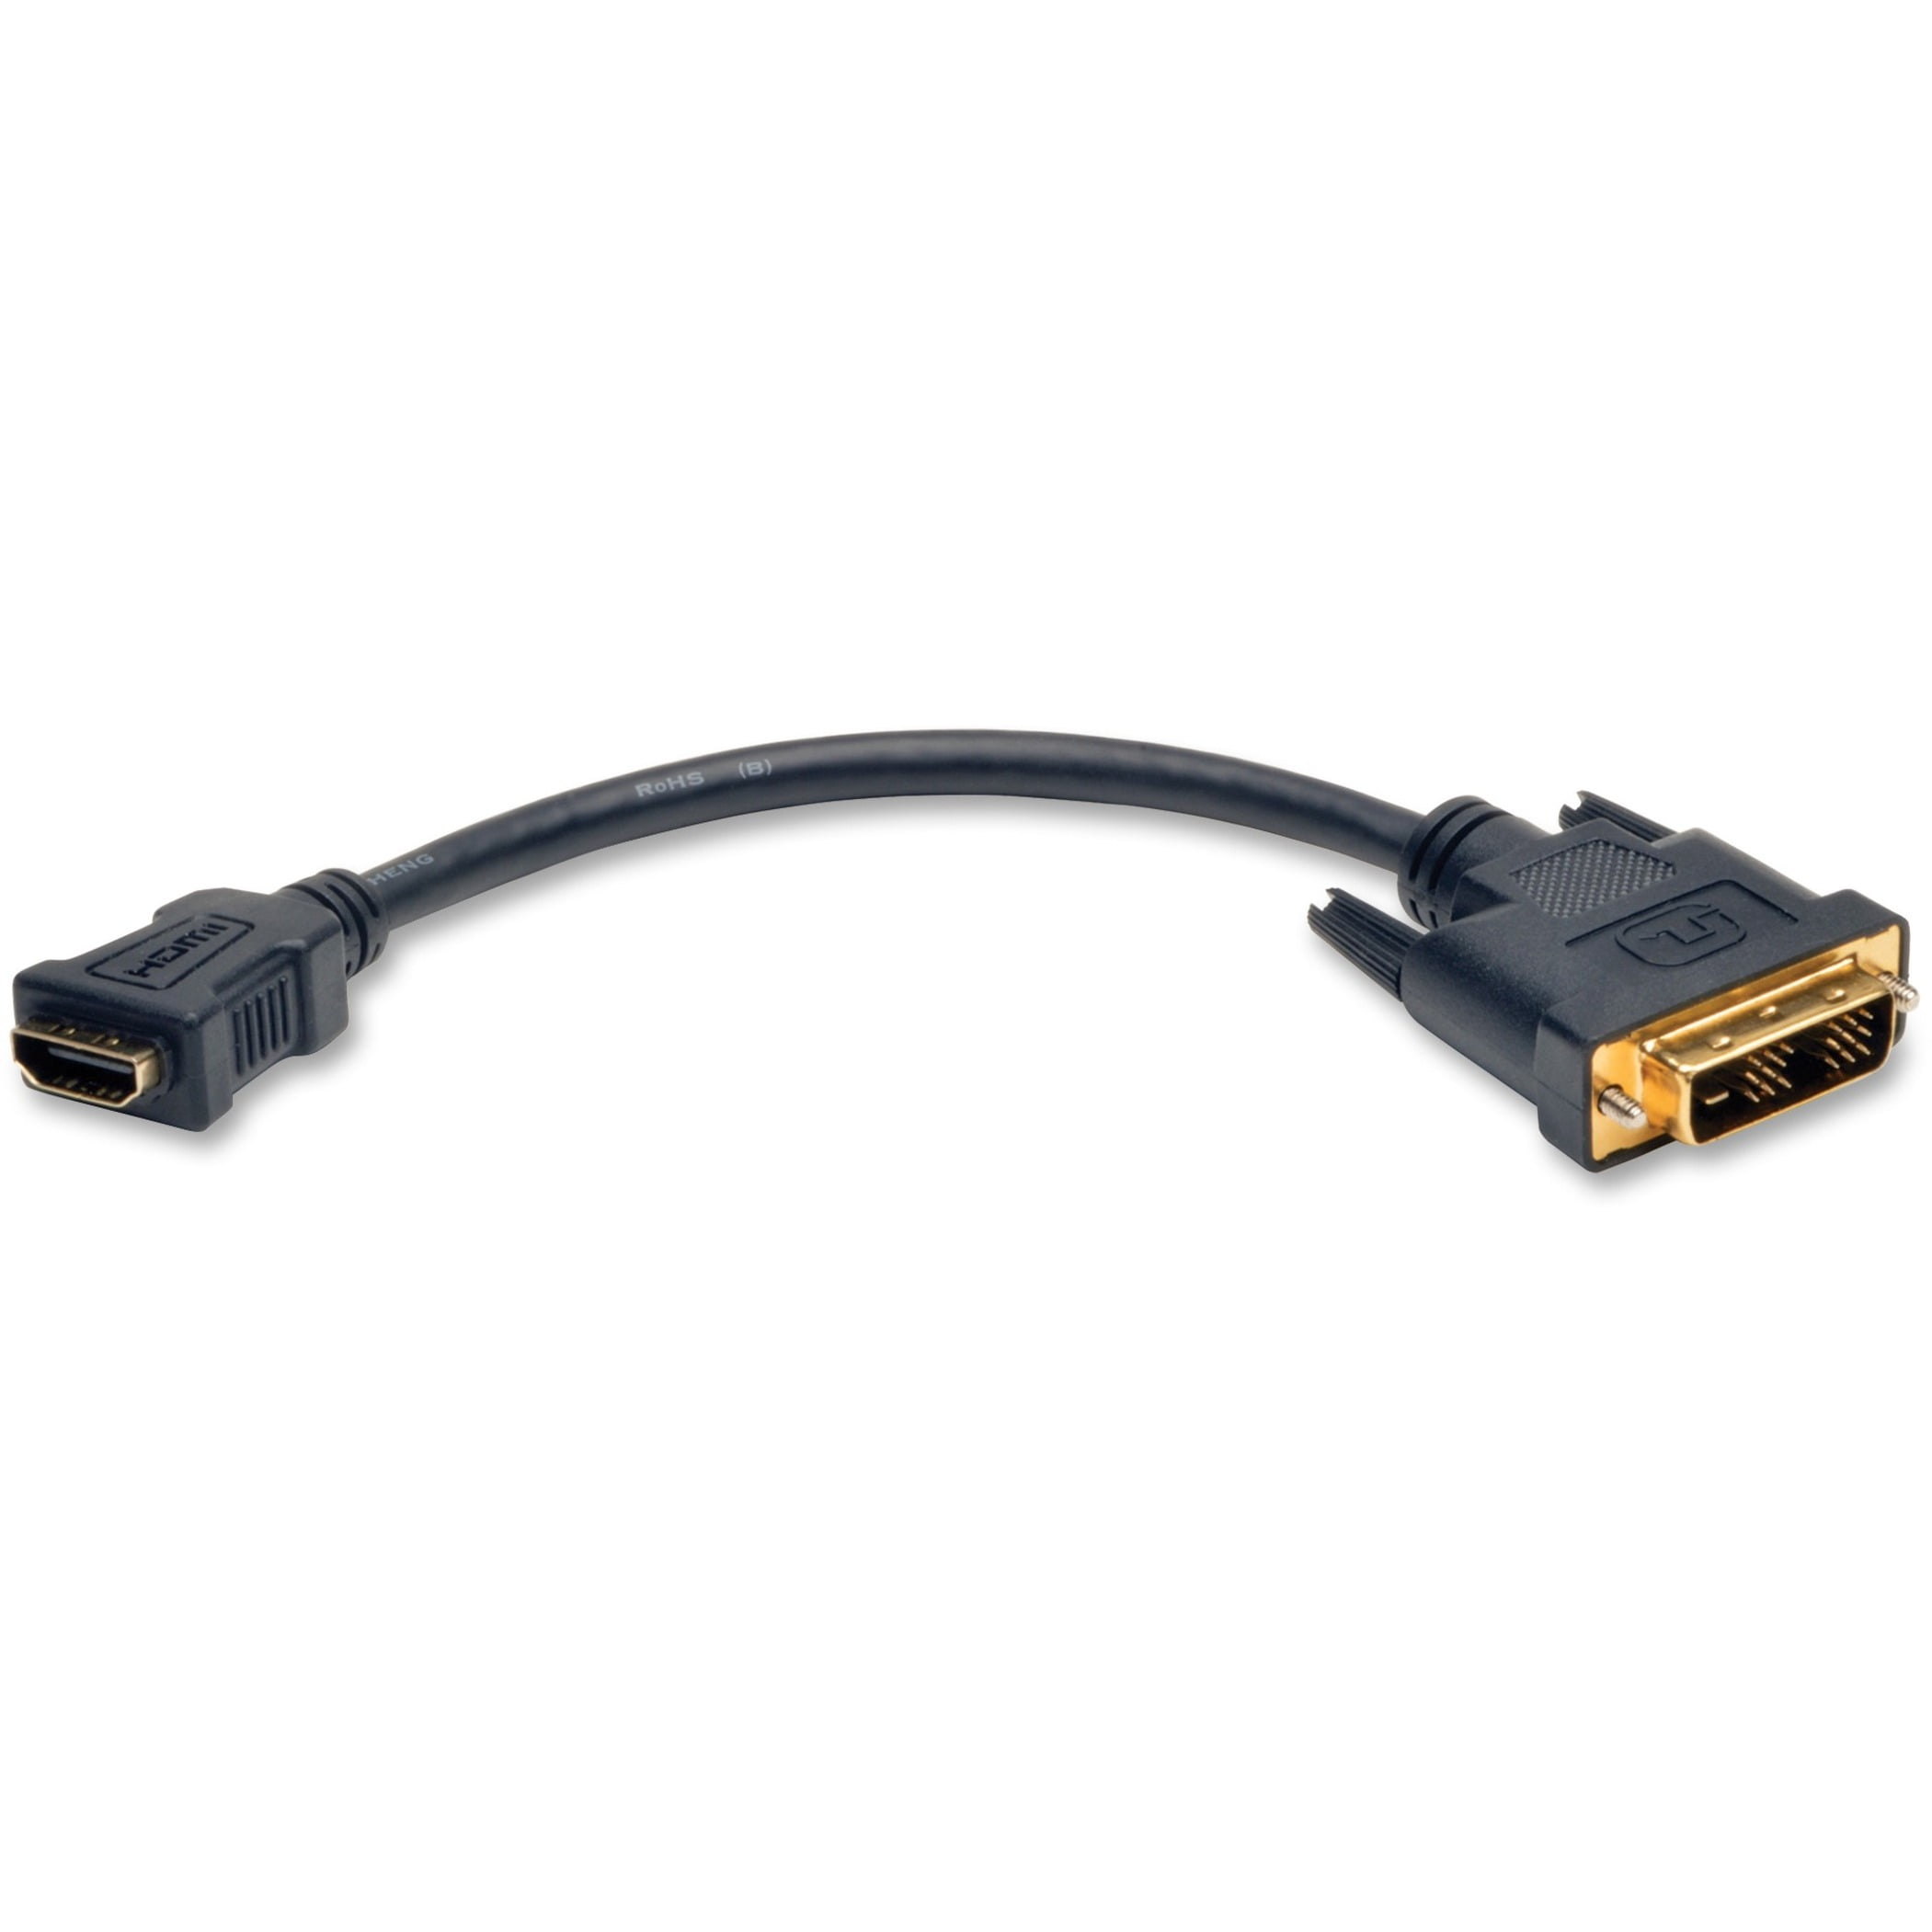 Black CDL Micro 2 m DVI-D Male to Female Single Link Extension Cable